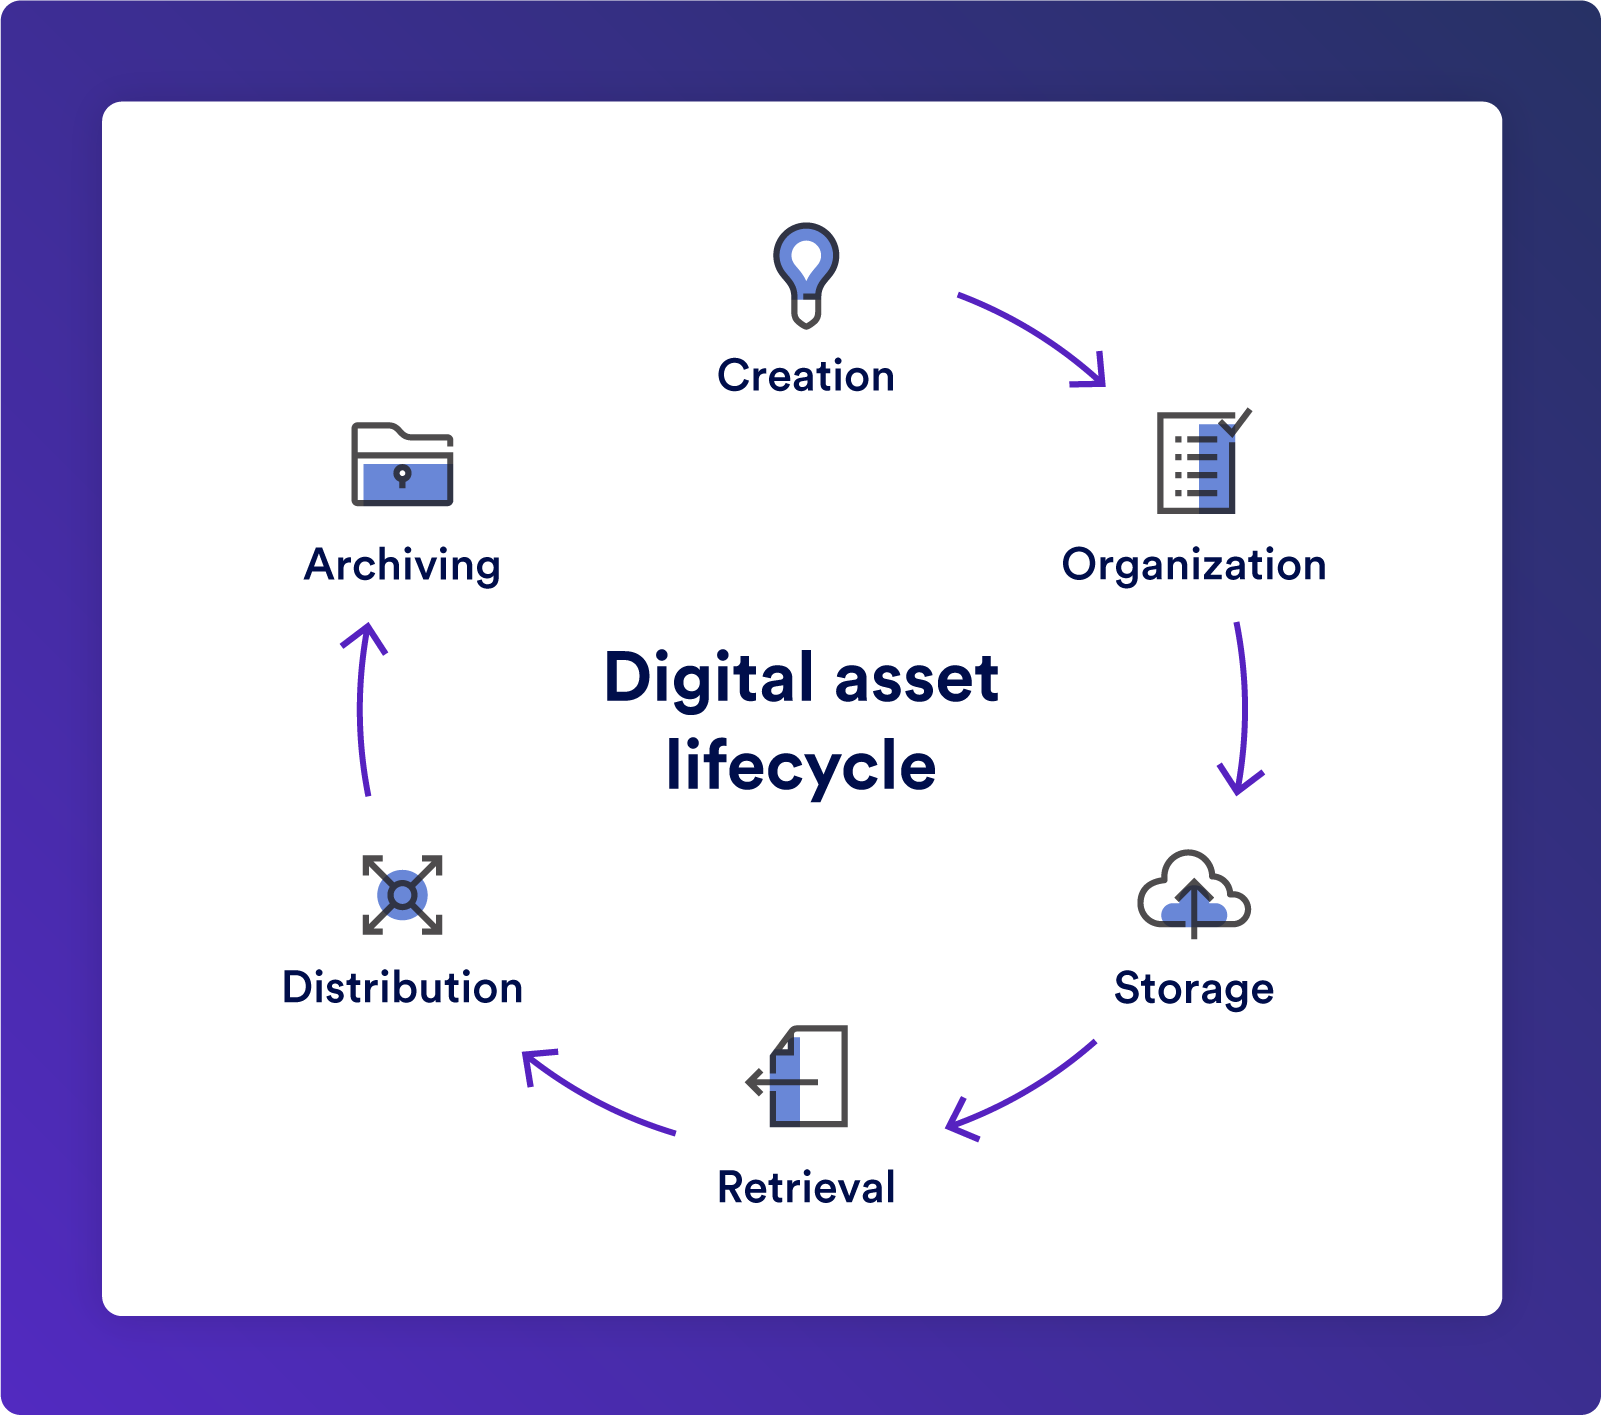 Digital asset lifecycle within a digital asset management workflow.